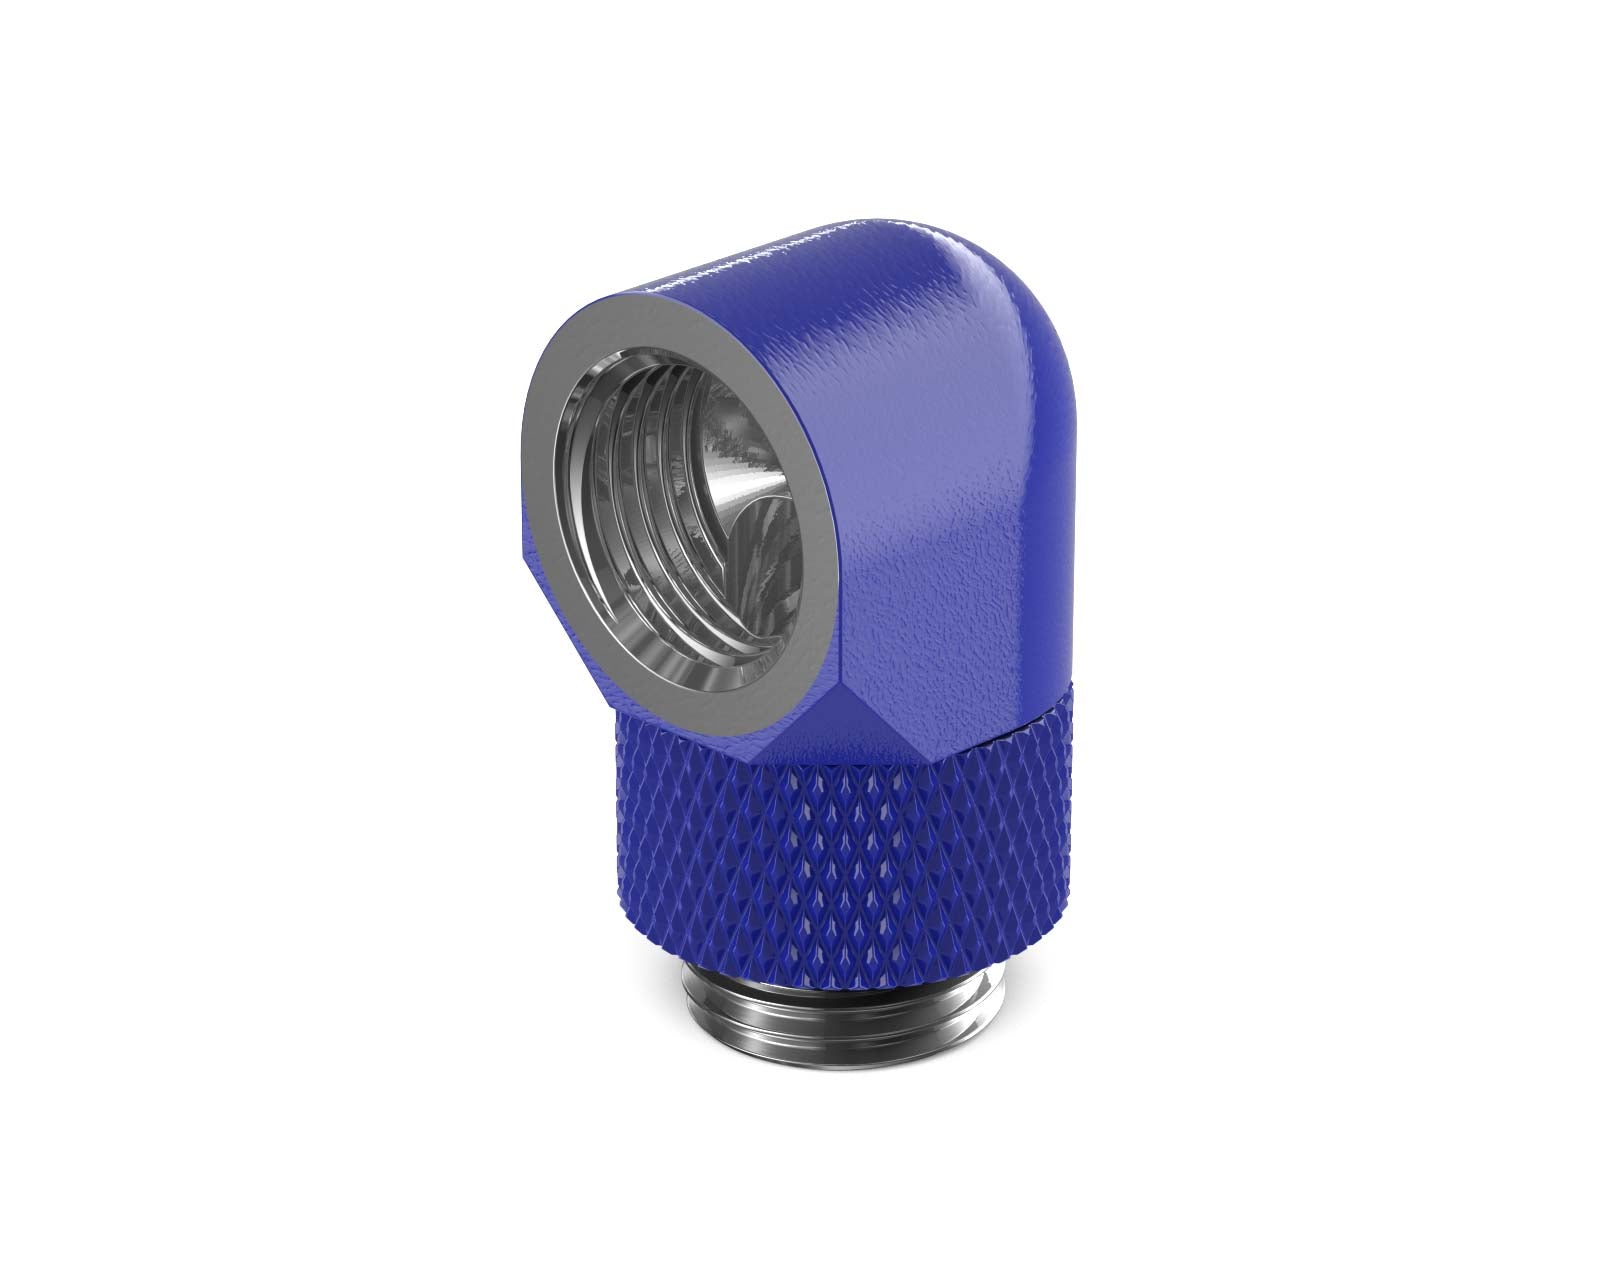 BSTOCK:PrimoChill Male to Female G 1/4in. 90 Degree SX Rotary Elbow Fitting - True Blue - PrimoChill - KEEPING IT COOL